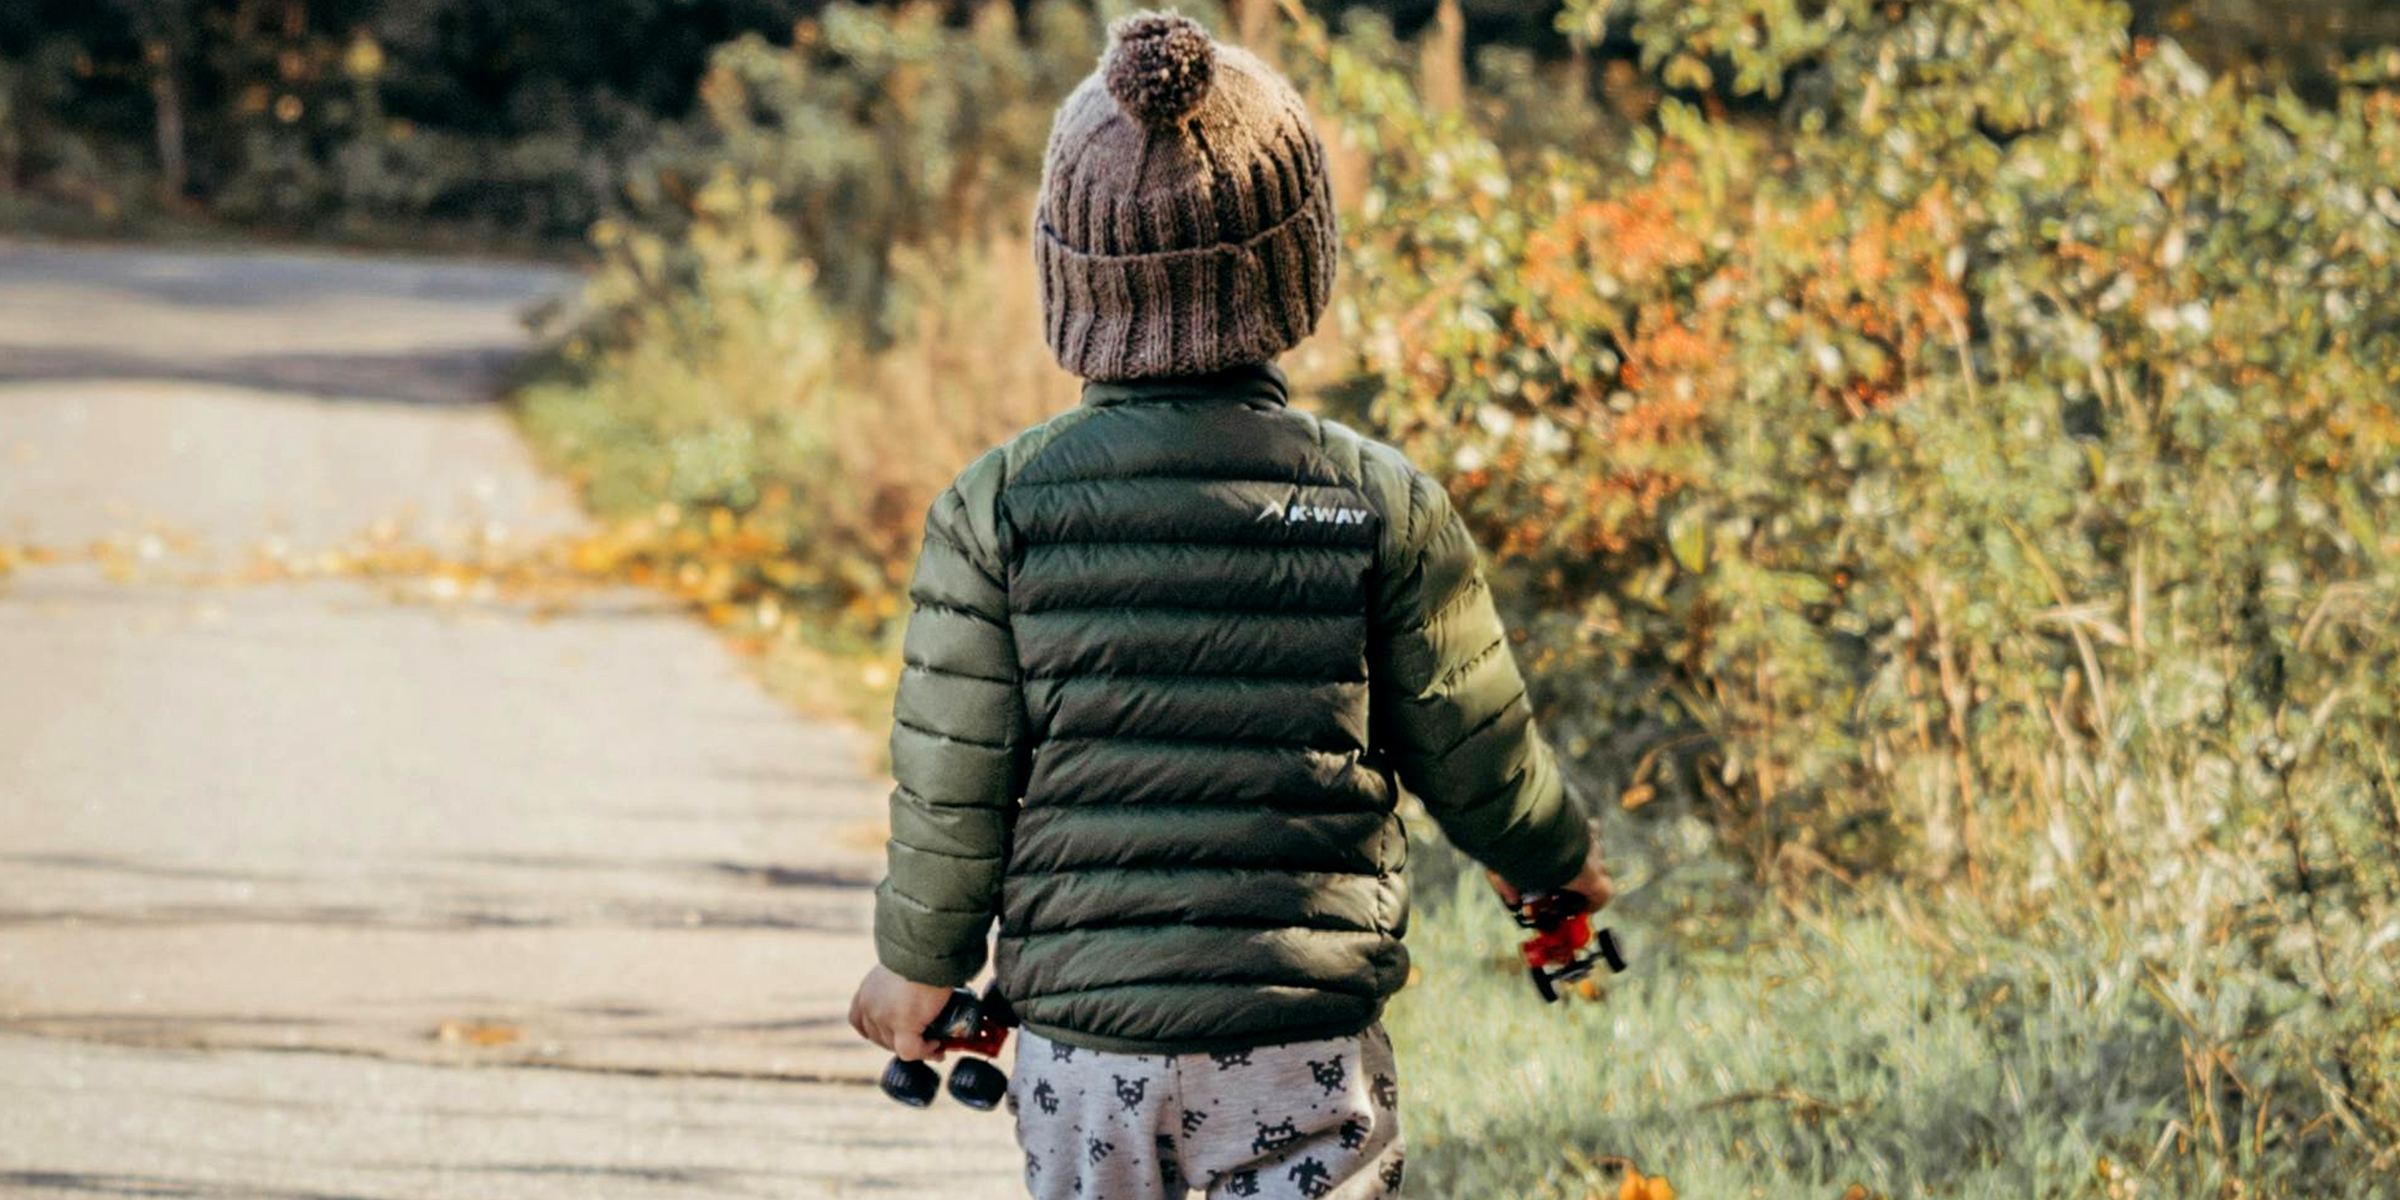 The back of a little boy | Source: Pexels